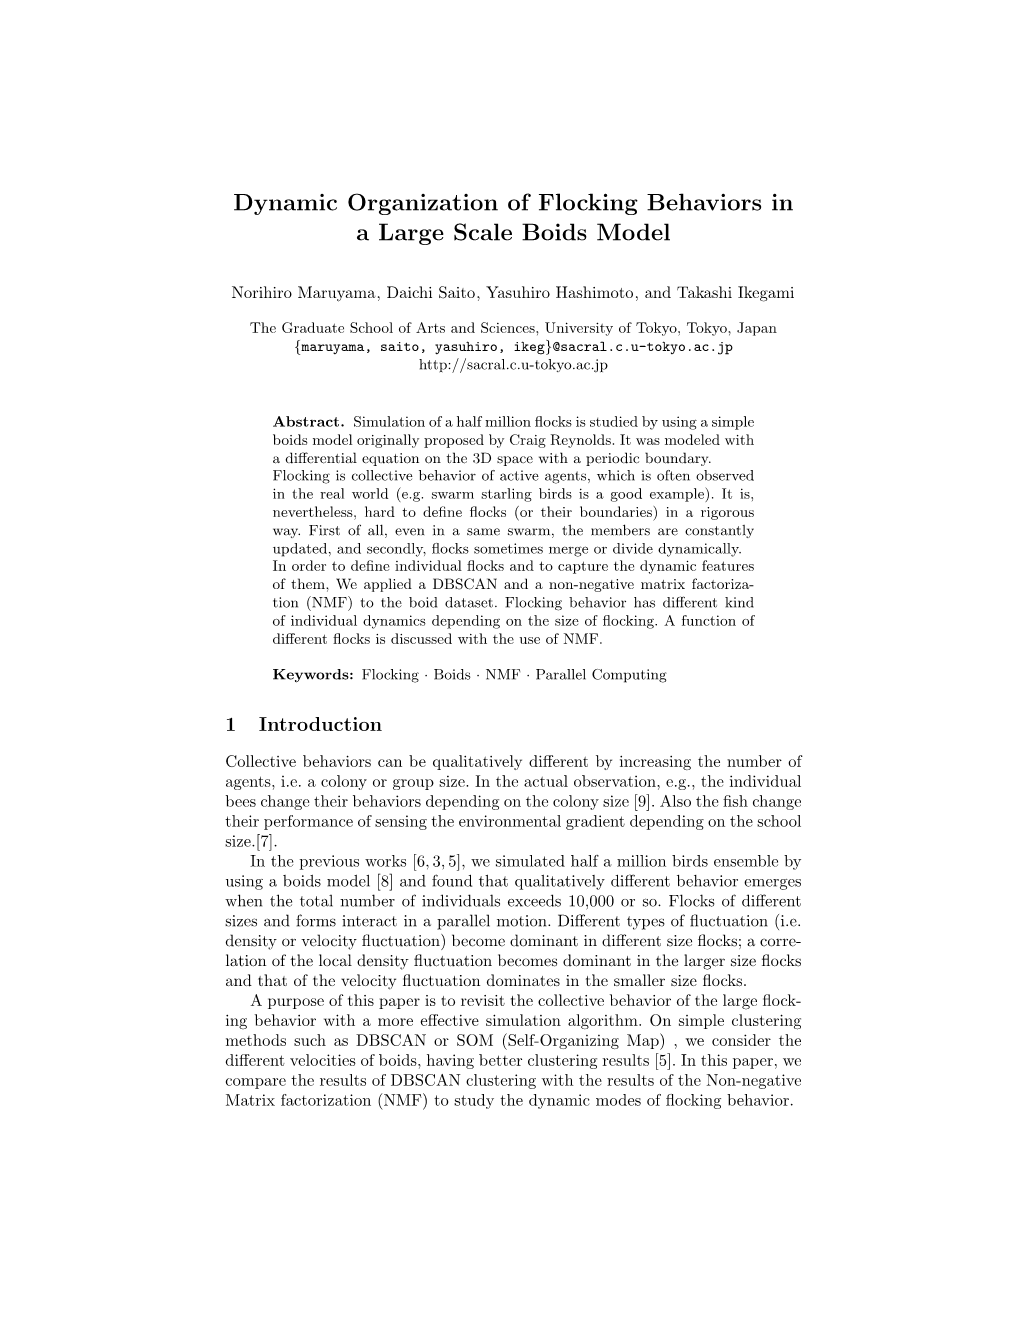 Dynamic Organization of Flocking Behaviors in a Large Scale Boids Model